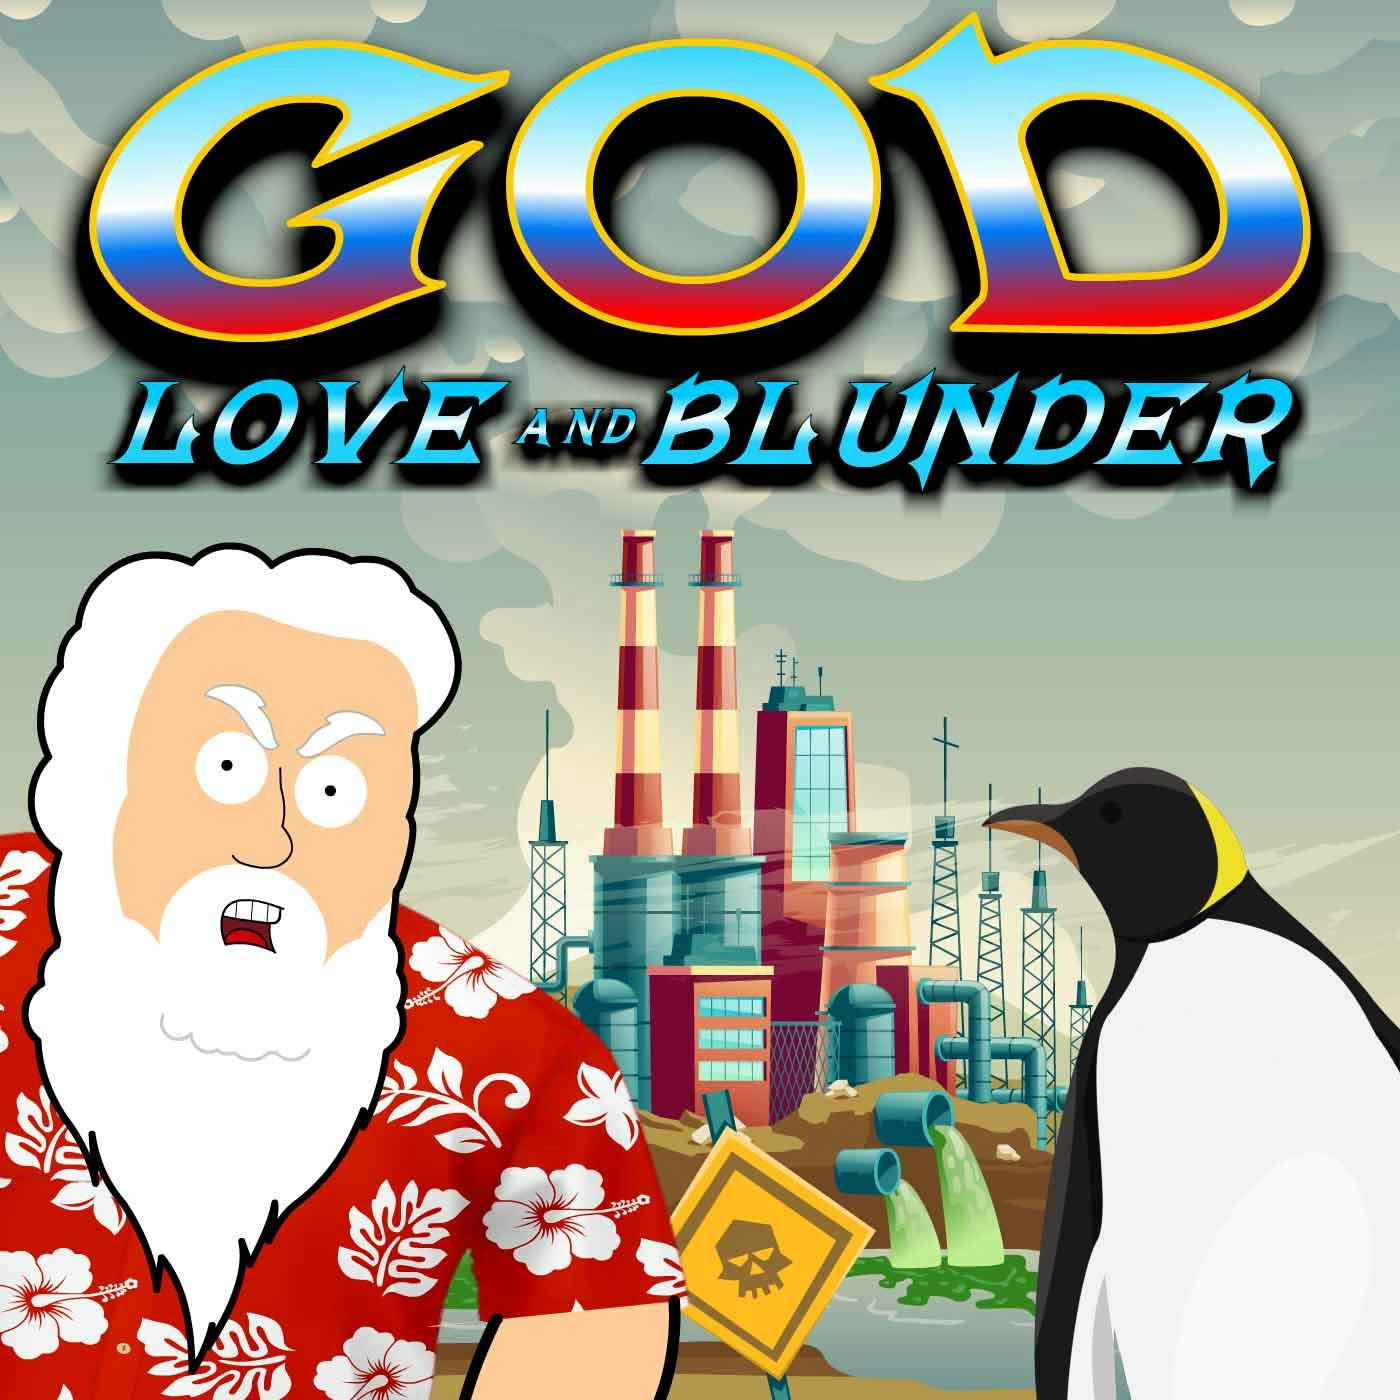 God: Love and Blunder